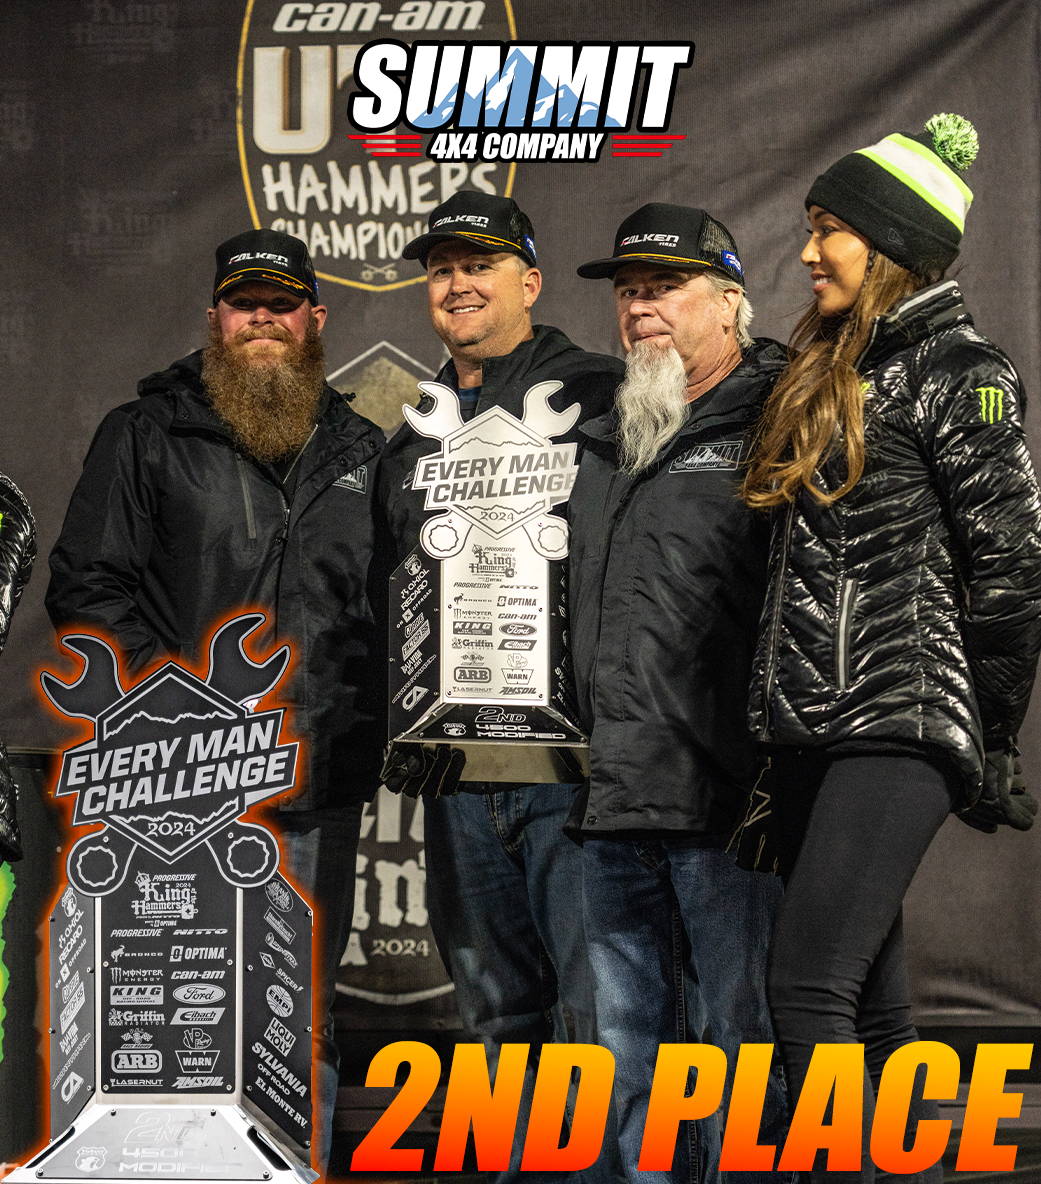 Summit 4x4 Company takes the stage winning 2nd place in the King of the Hammers